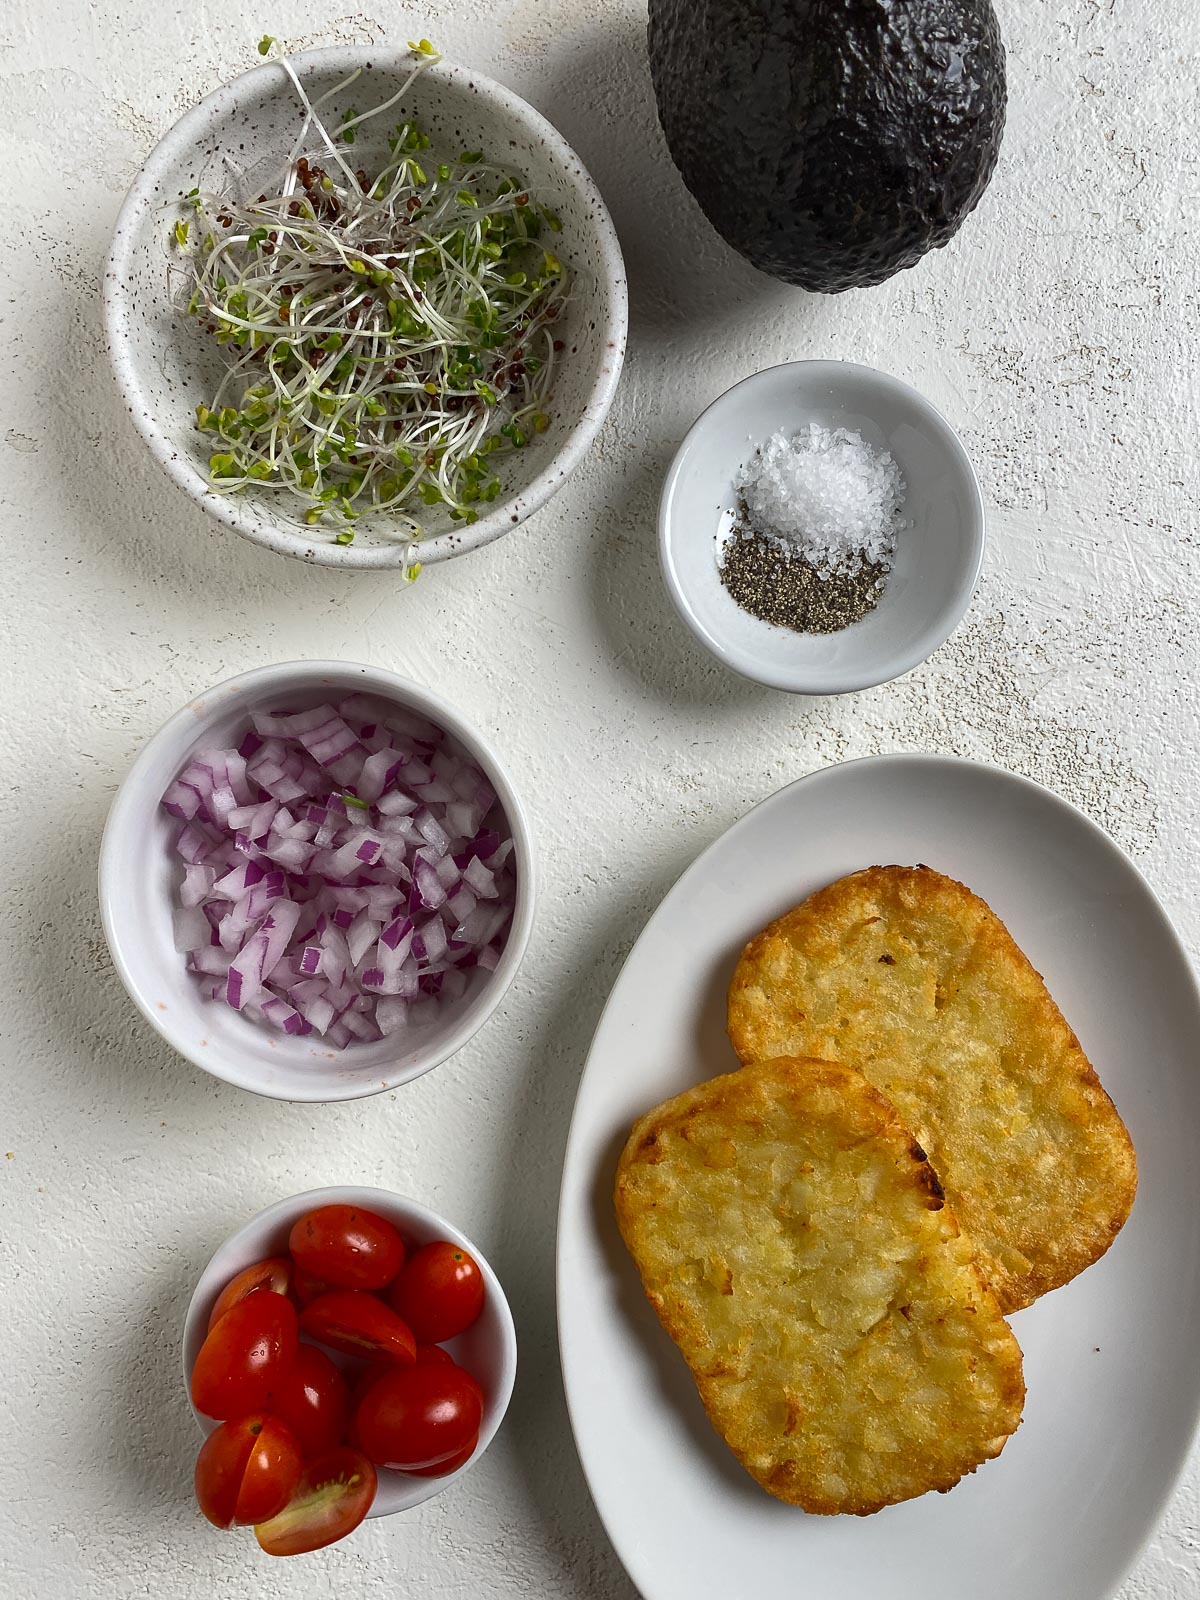 ingredients for Smashed Avocado Hashbrown Toast measured out in individual platters against a light surface